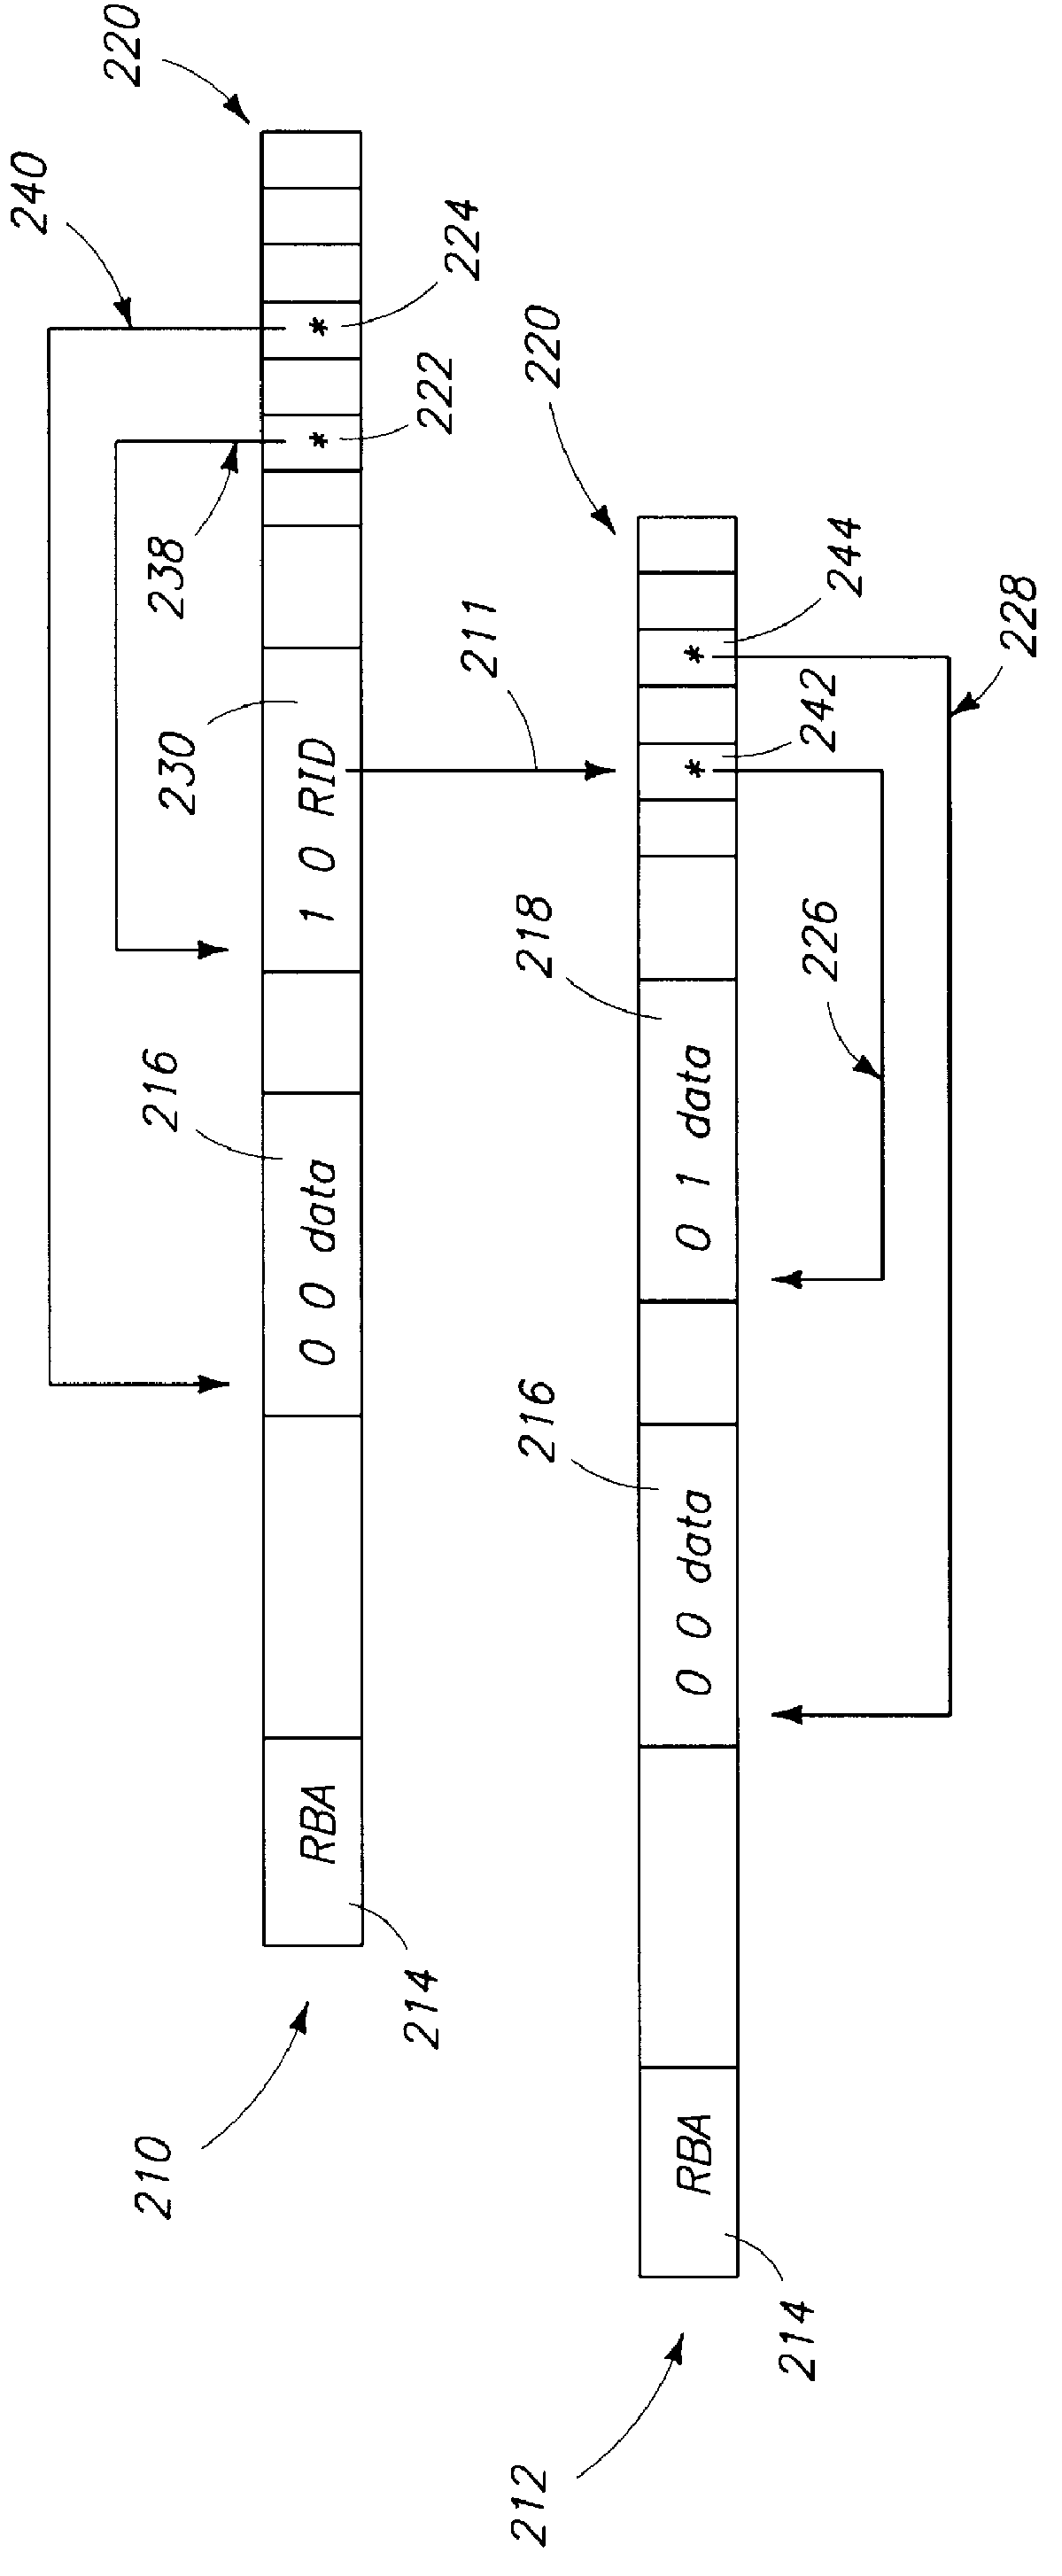 Interaction between application of a log and maintenance of a table that maps record identifiers during online reorganization of a database